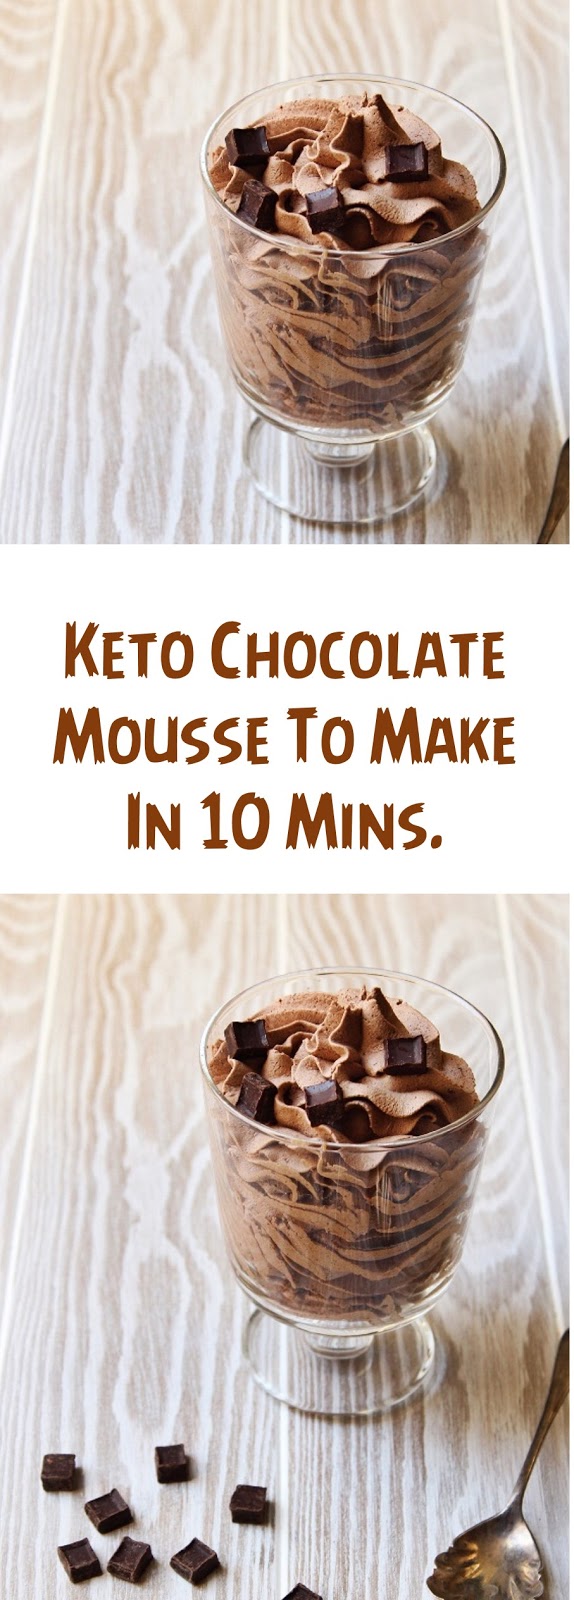 Keto Chocolate Mousse To Make In 10 Mins.